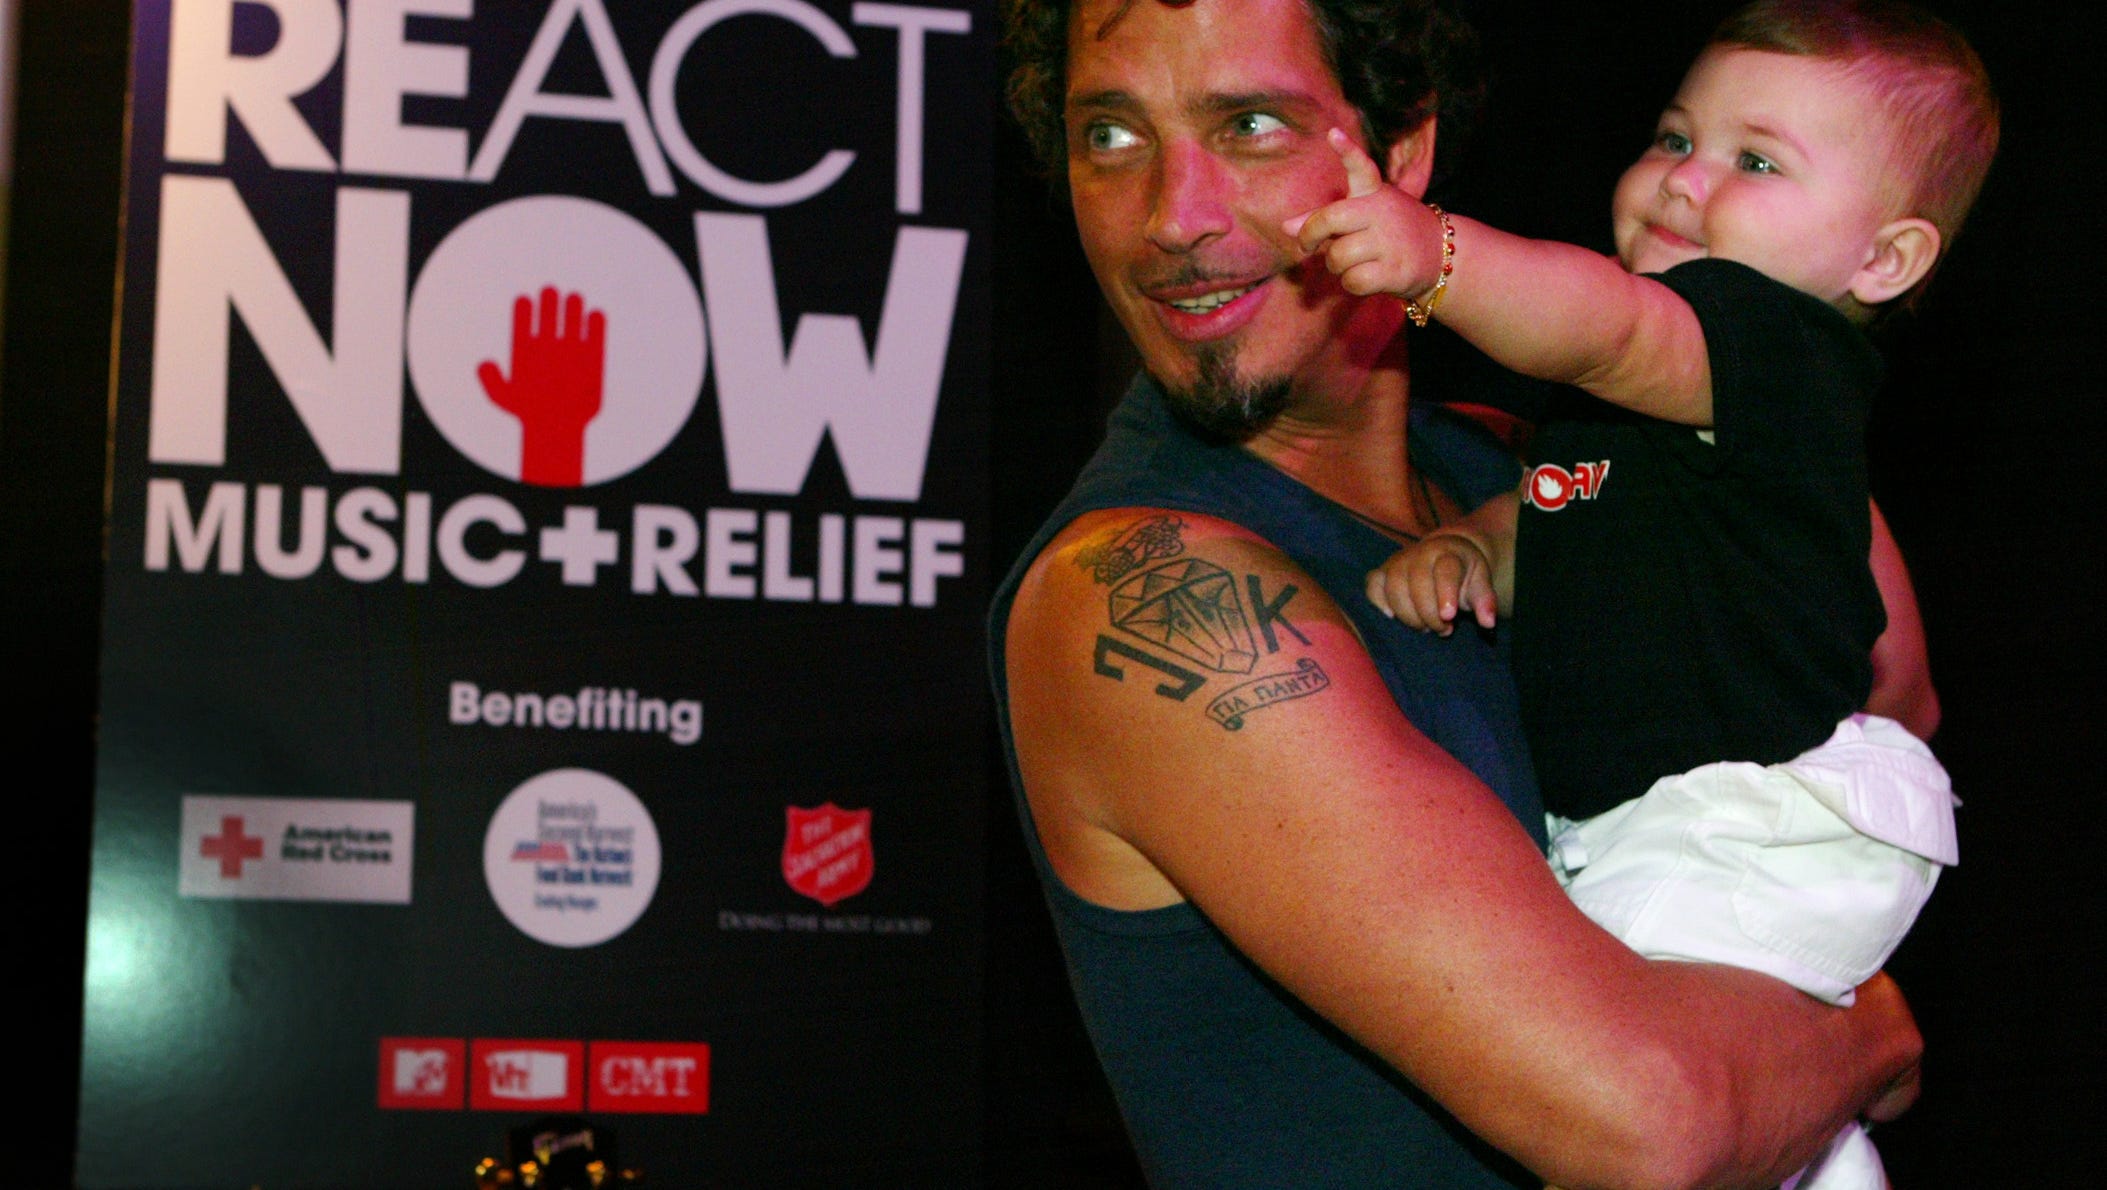 Chris Cornell holds his 11 1/2 month old daughter Toni backstage after he performed during the "ReAct Now: Music & Relief" TV special, a fund-raiser for the victims of Hurricane Katrina,  Sept. 10, 2005, in Los Angeles.